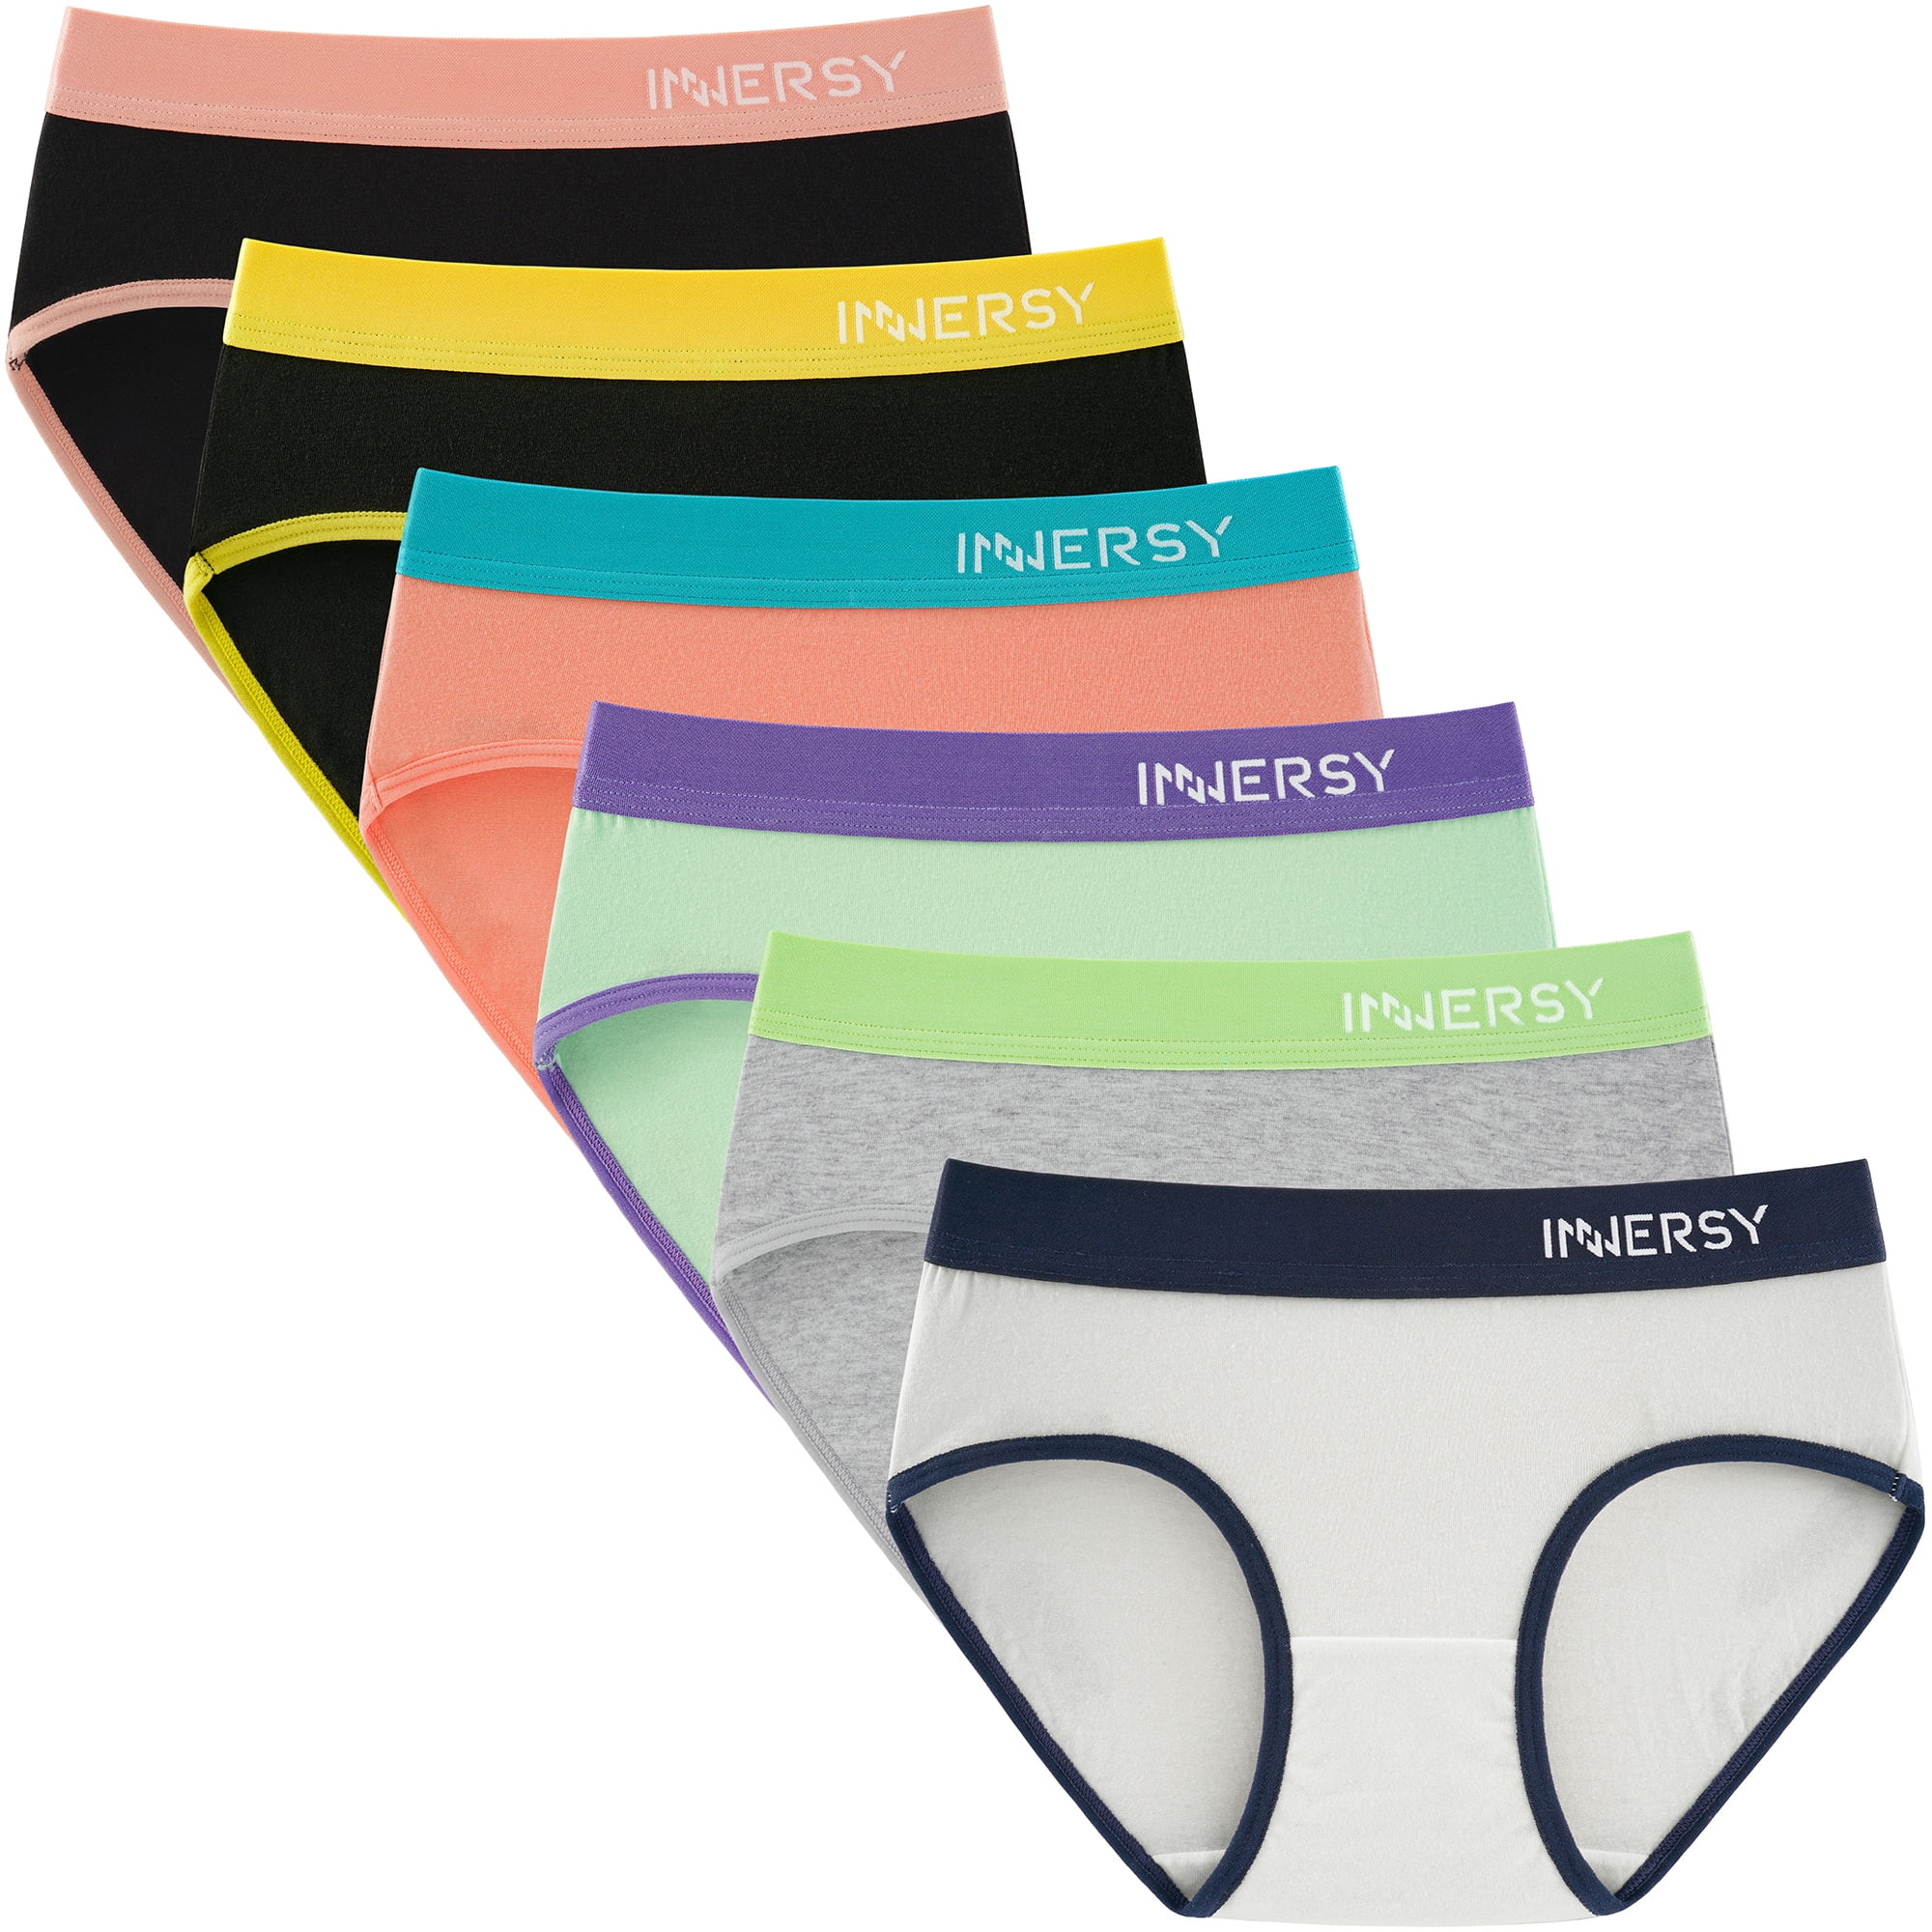 INNERSY Big Girls' Underwear Cotton Full Briefs Contrasting Color Panties  for Teens 6 Pack(XL(14-16 yrs), Basics) 